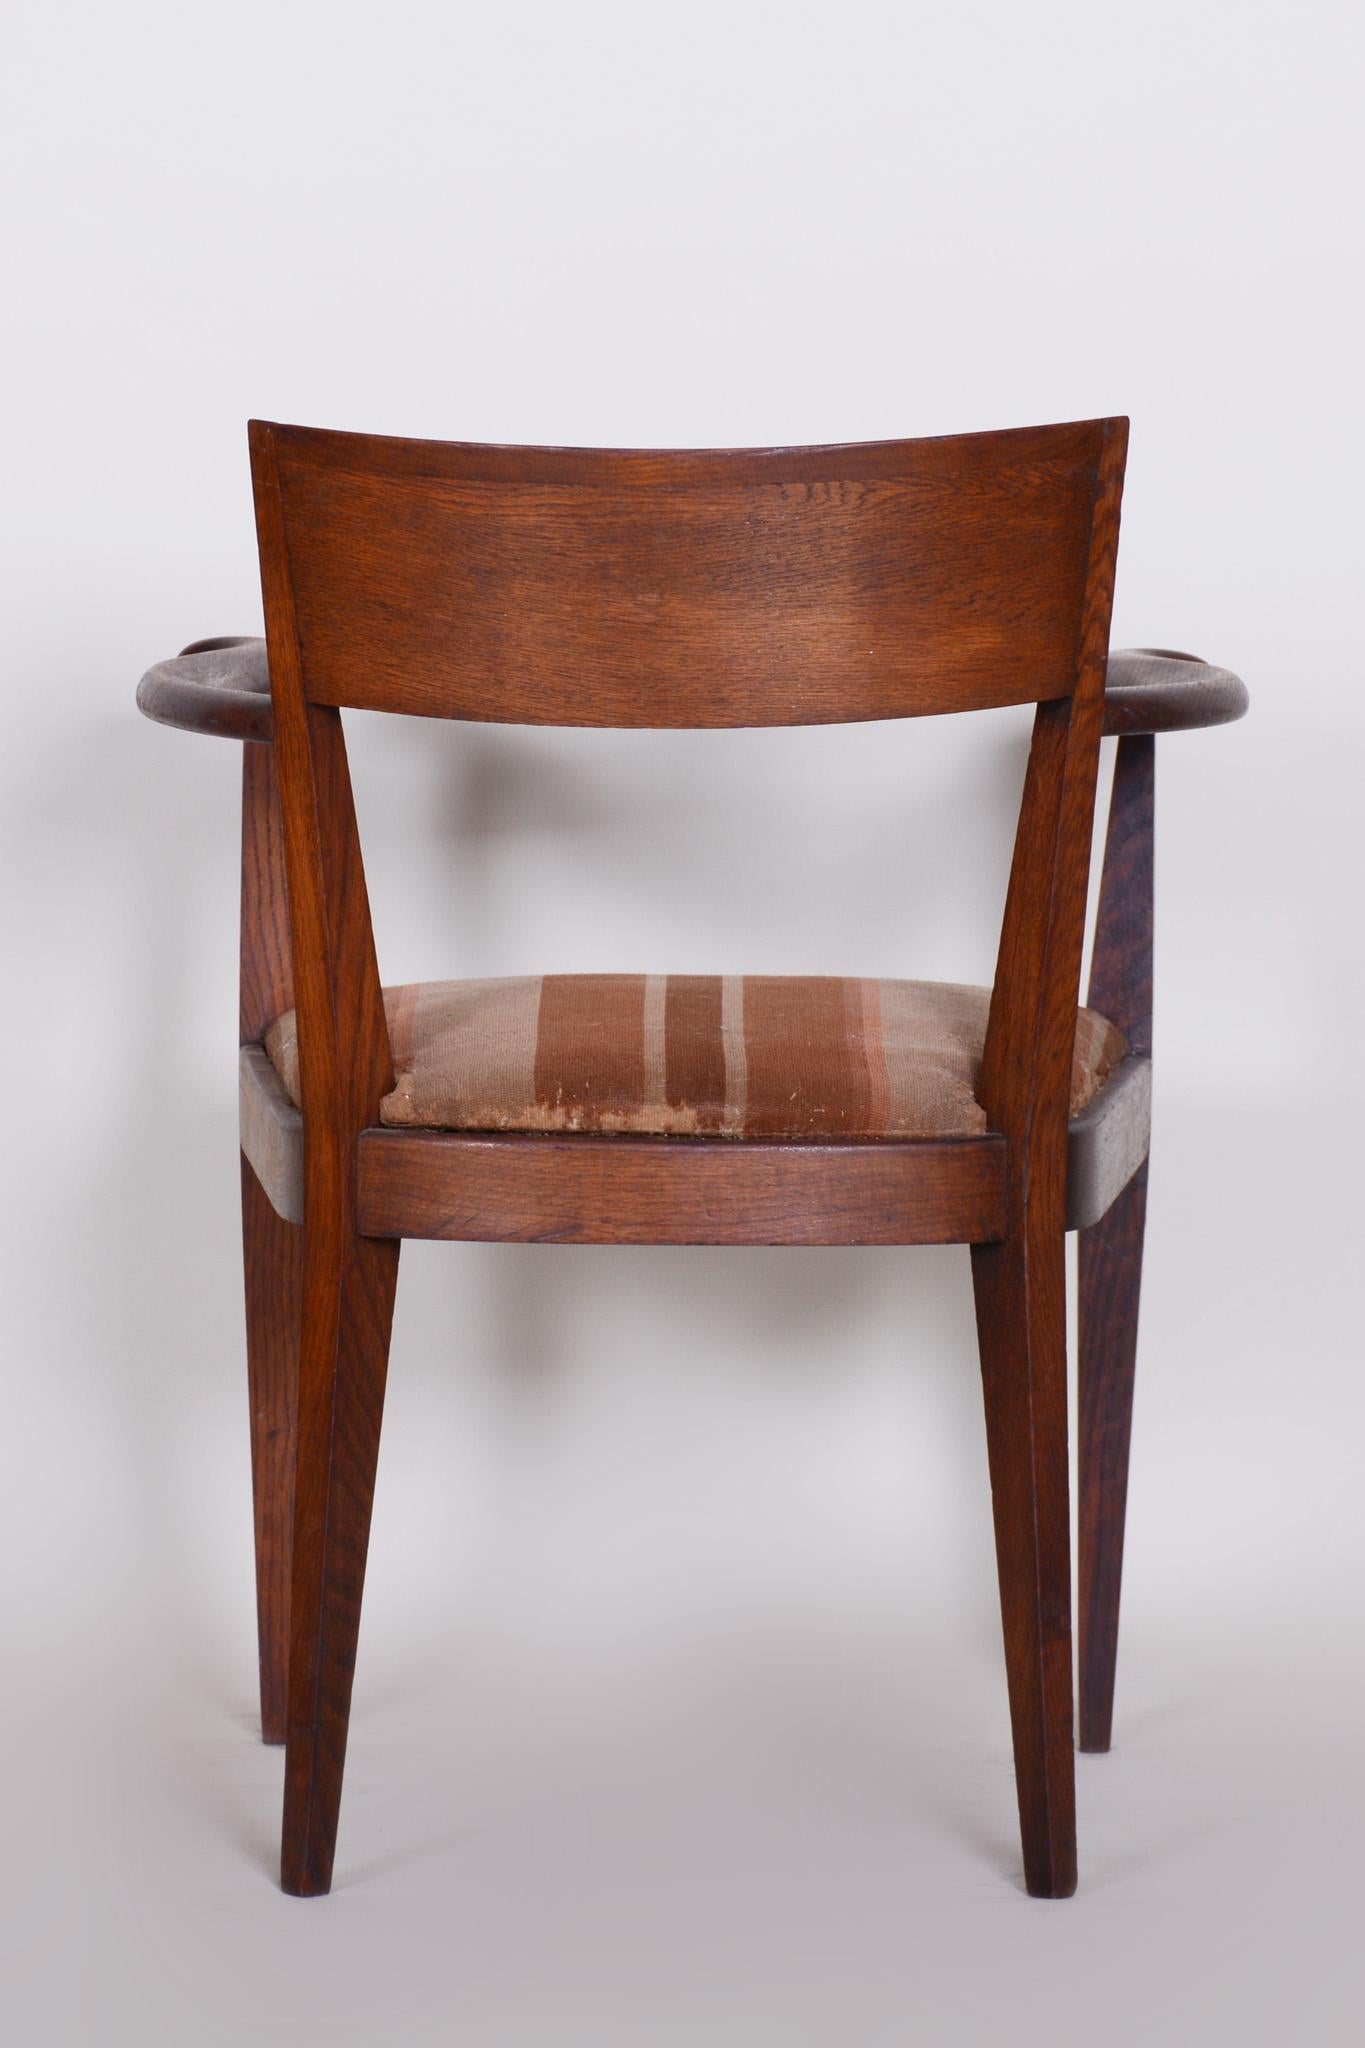 Brown Oak Cubist Art Deco Armchair, Original Well Preserved Condition, 1920s In Good Condition For Sale In Horomerice, CZ